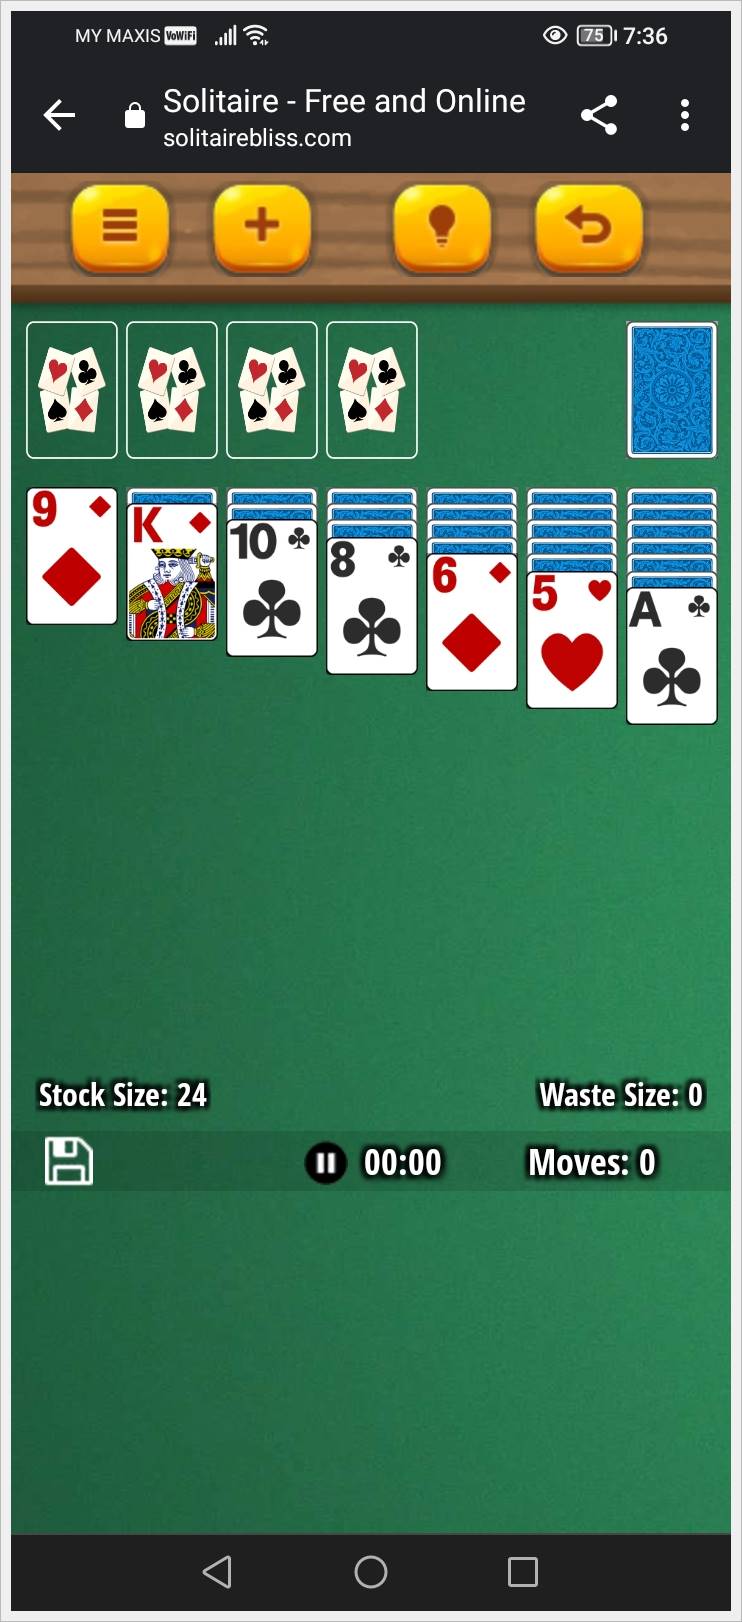 Google and Microsoft games alternatives; This is a mobile screenshot of the game Solitaire Bliss.